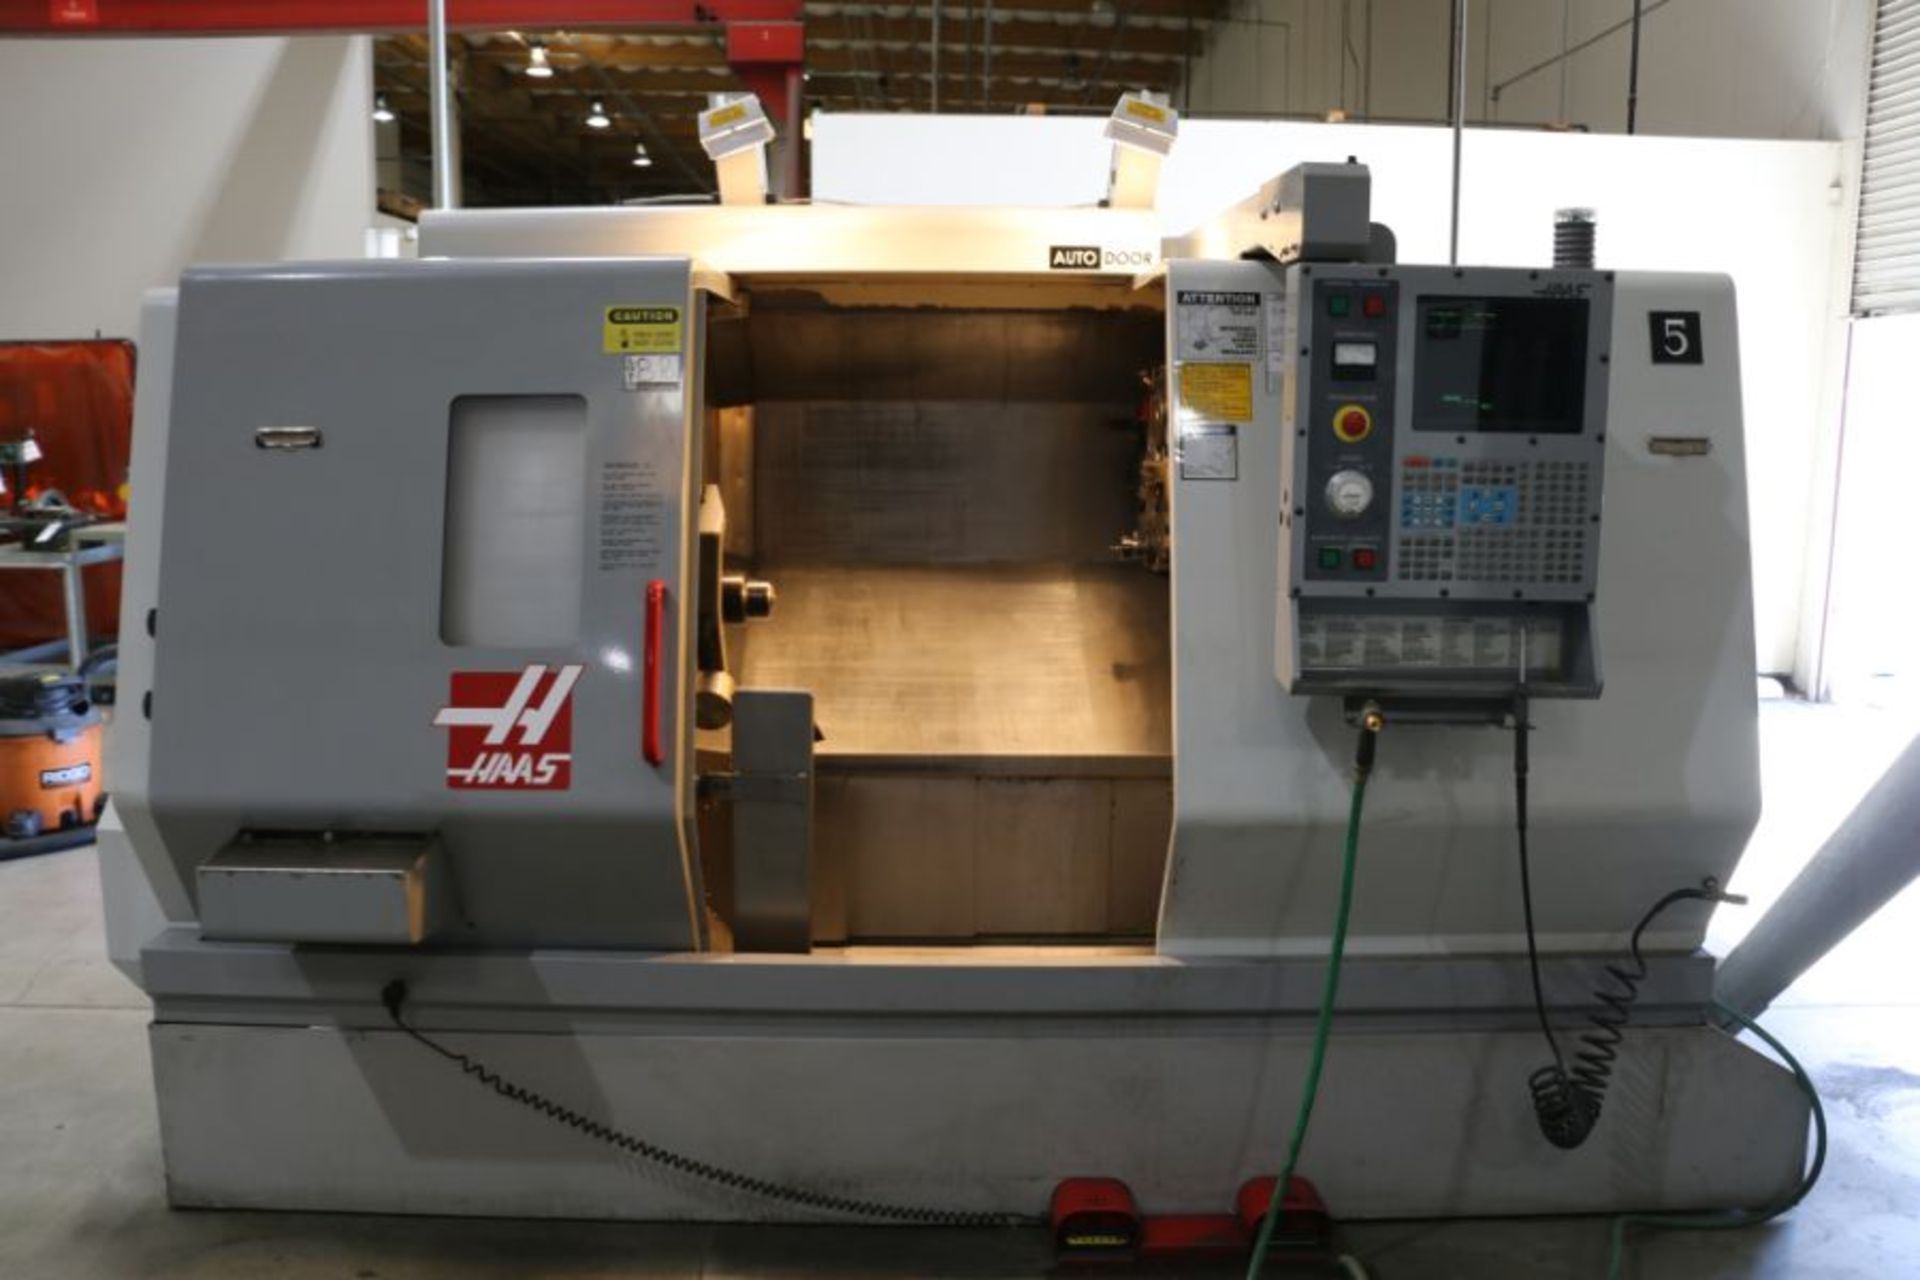 Haas TL-25 CNC Lathe, Collet Nose, 12 Position Turret, s/n 65420, New 2002 - Image 2 of 9